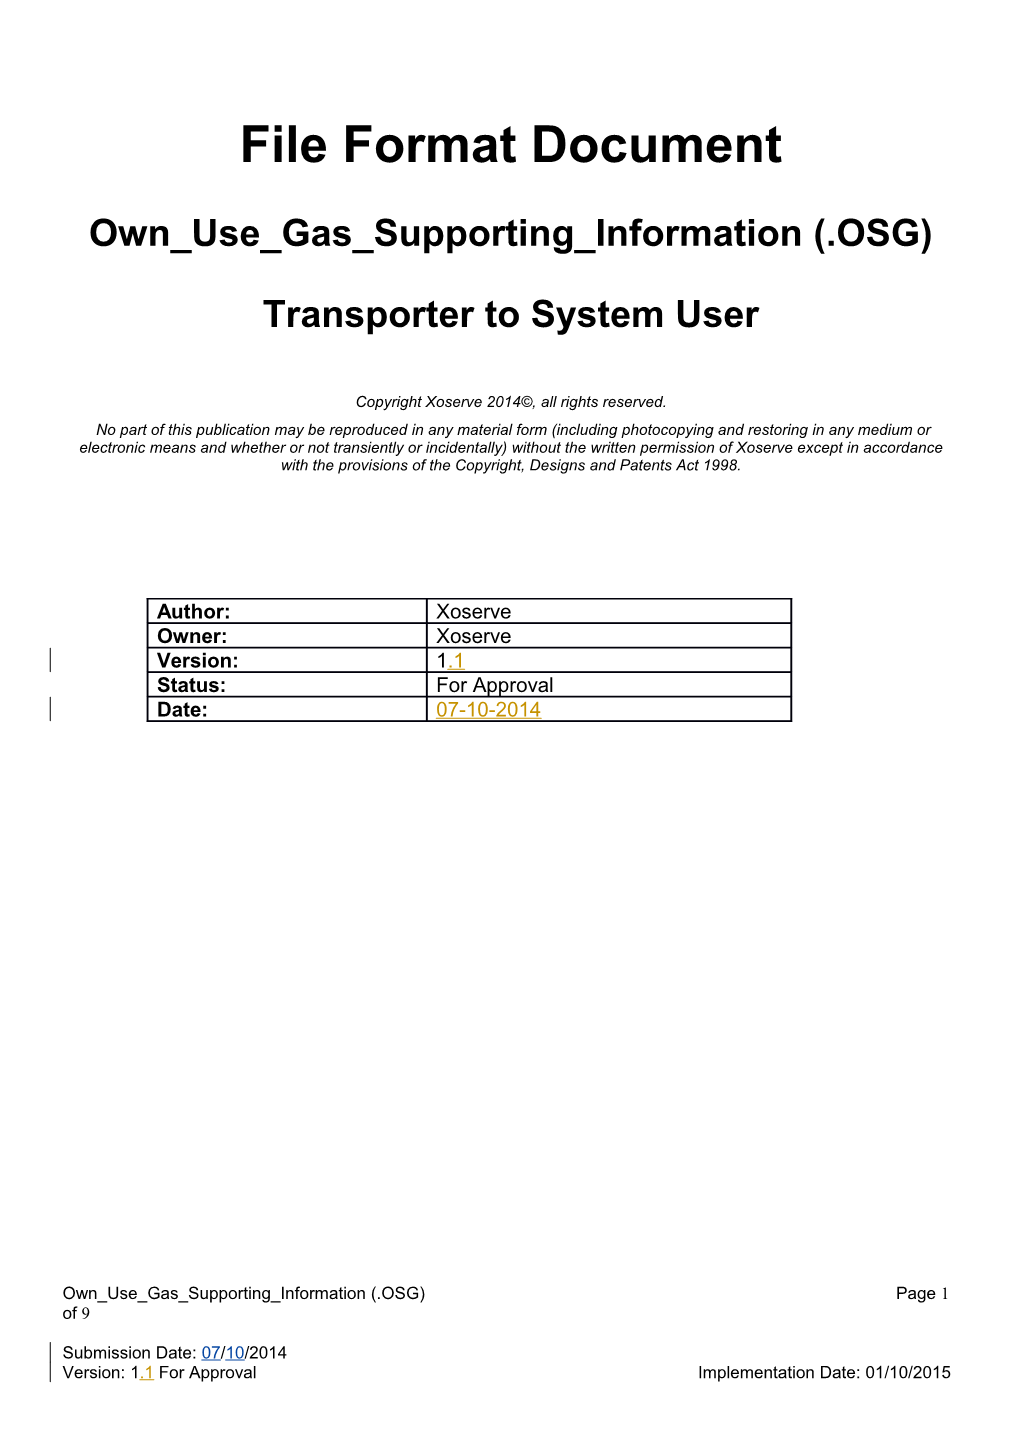 Own Use Gas Supporting Information (.OSG)